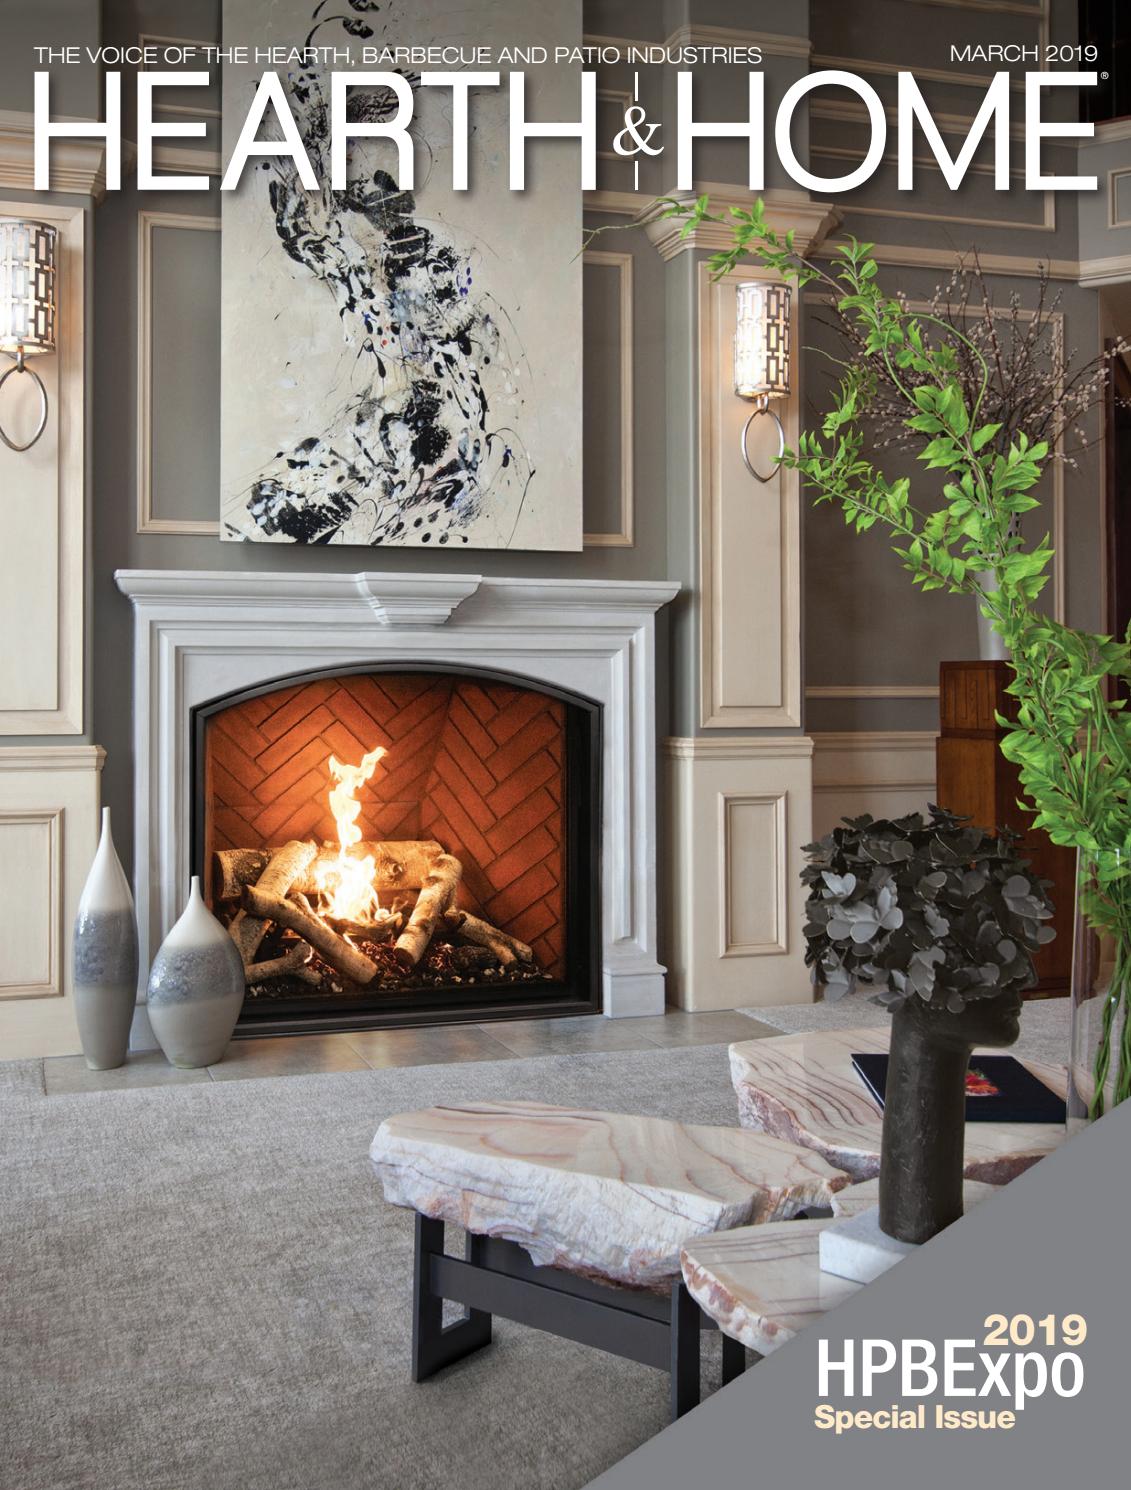 Fireplace andirons and Grates Unique Hearth & Home Magazine – 2019 March issue by Hearth & Home